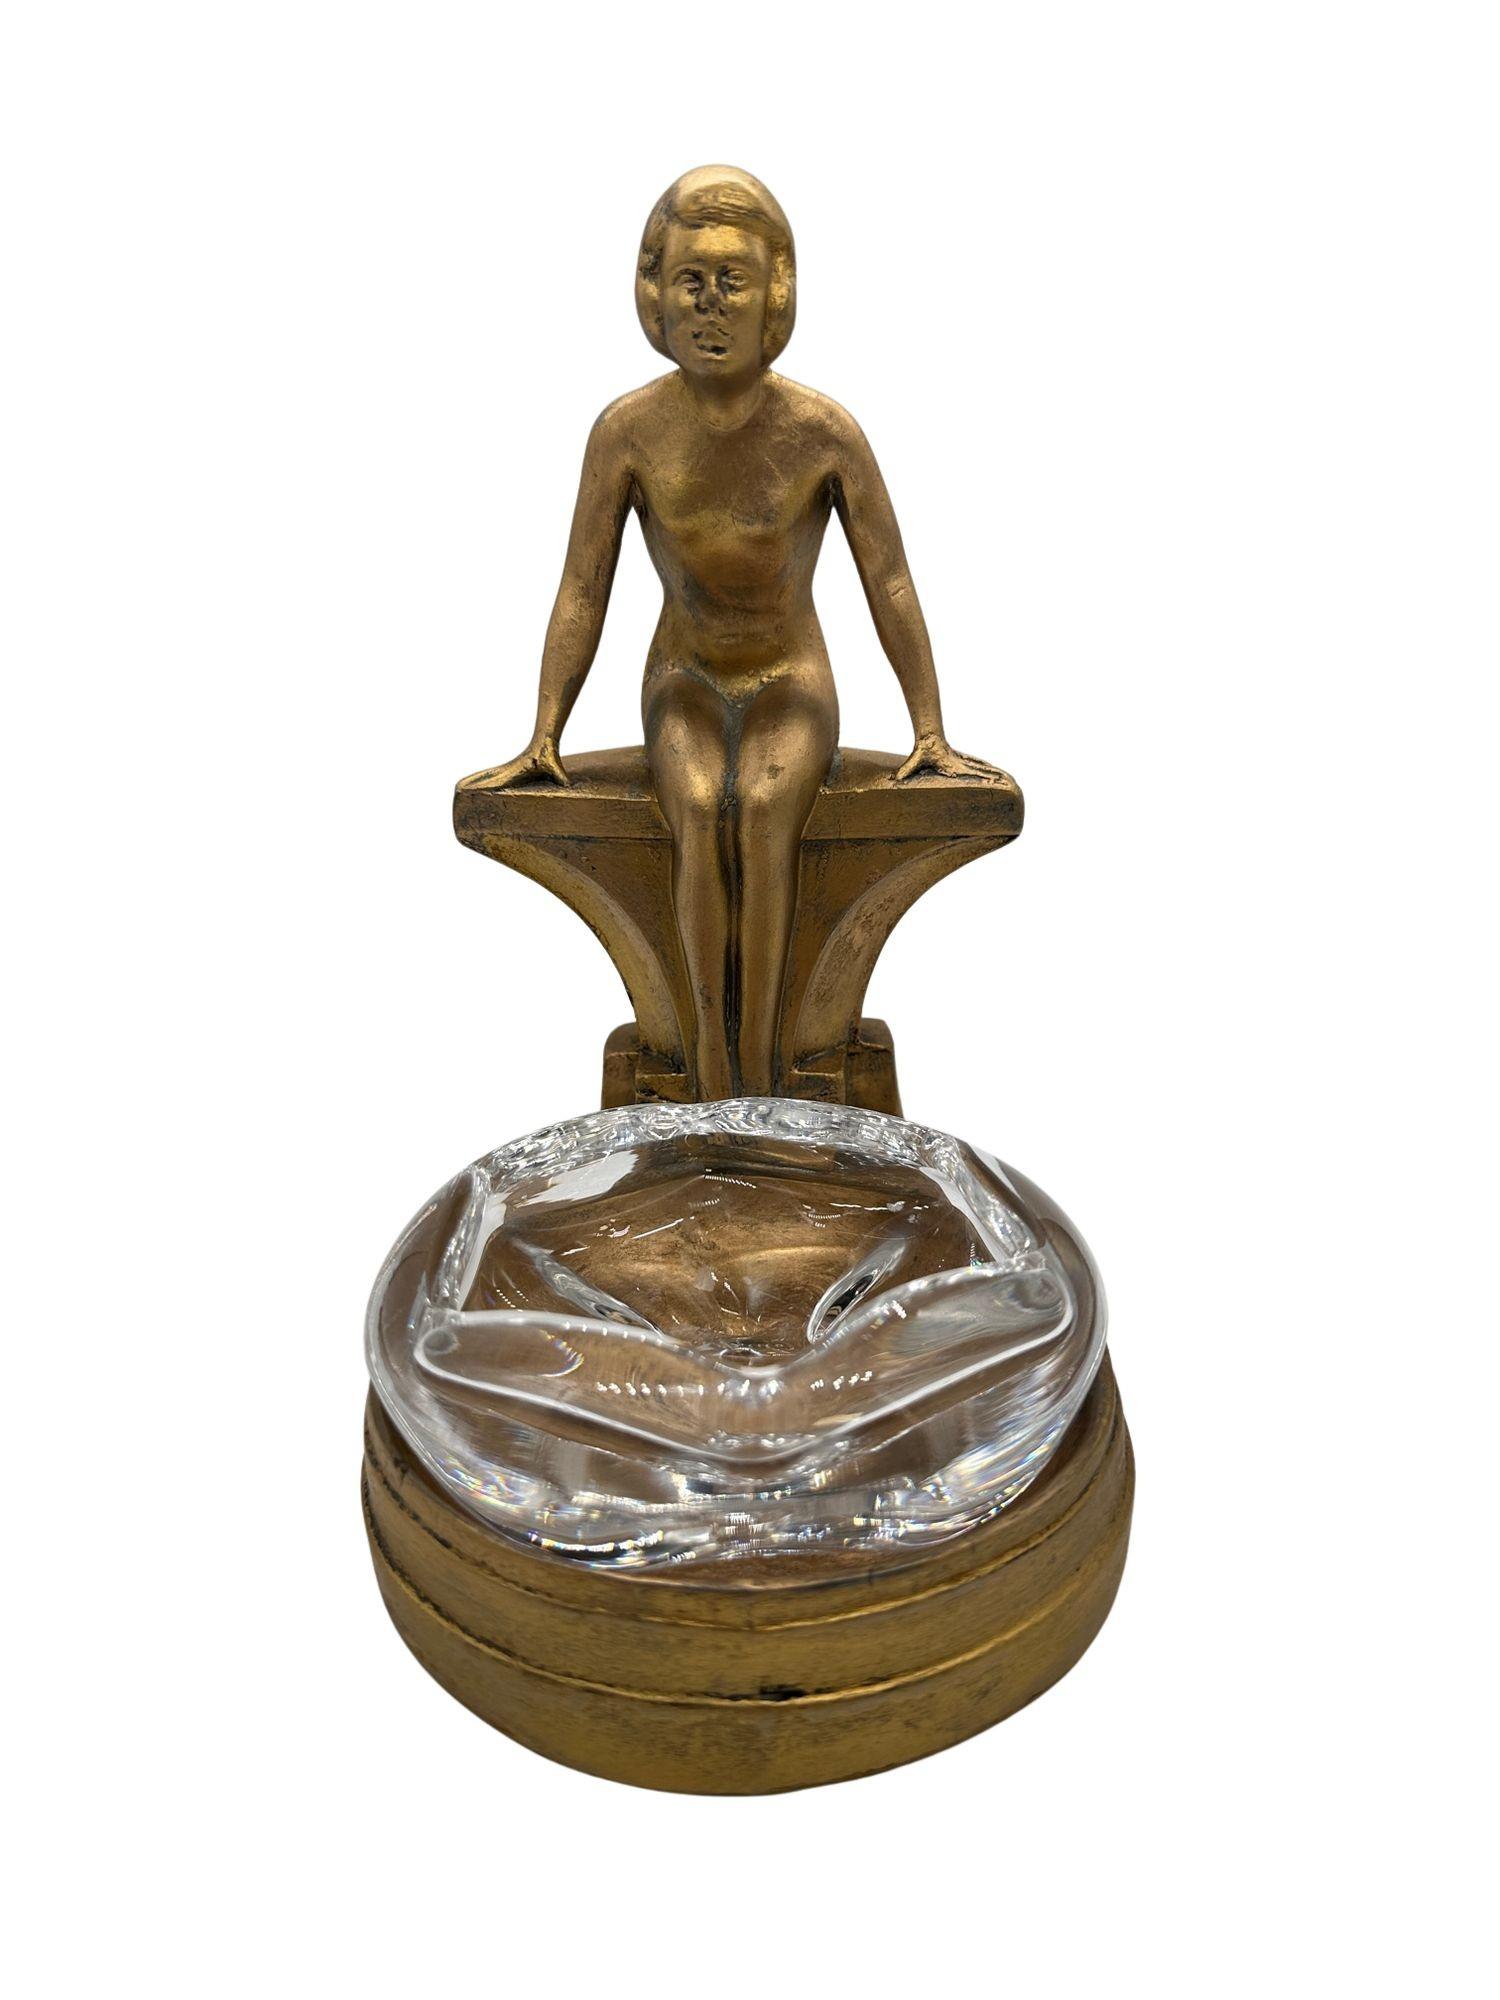 Art Deco Nude Woman Seated at Pool Bronze & Crystal Sculpter Ashtray by Nuart In Good Condition For Sale In Van Nuys, CA